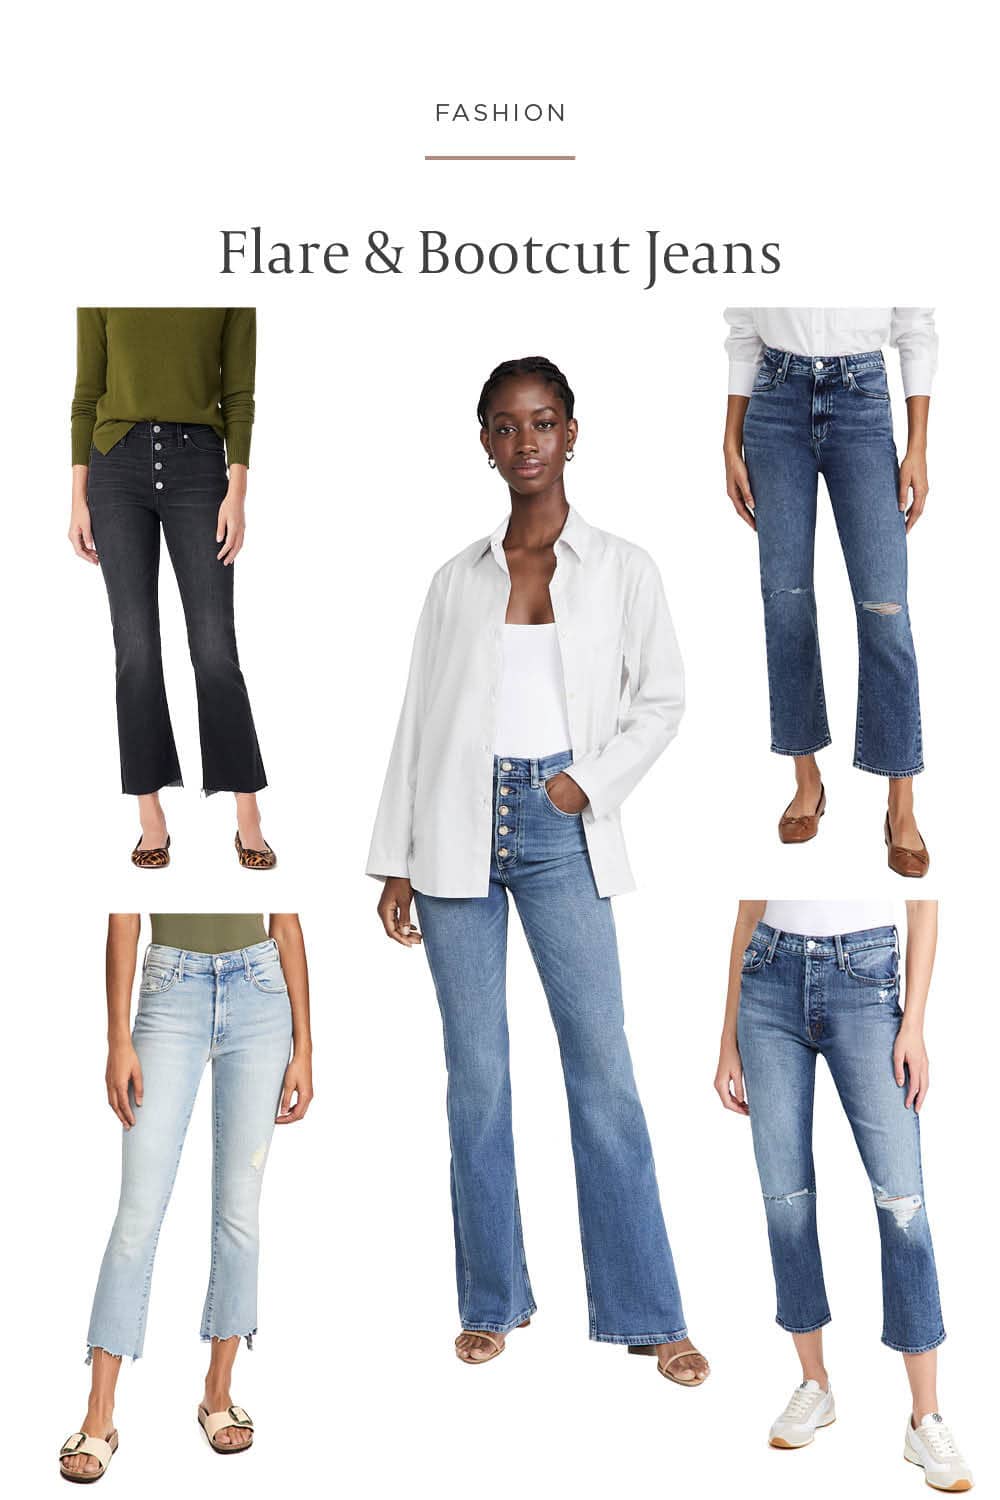 Trending Jeans - The flare and boot cut jeans are fitted until the ankle